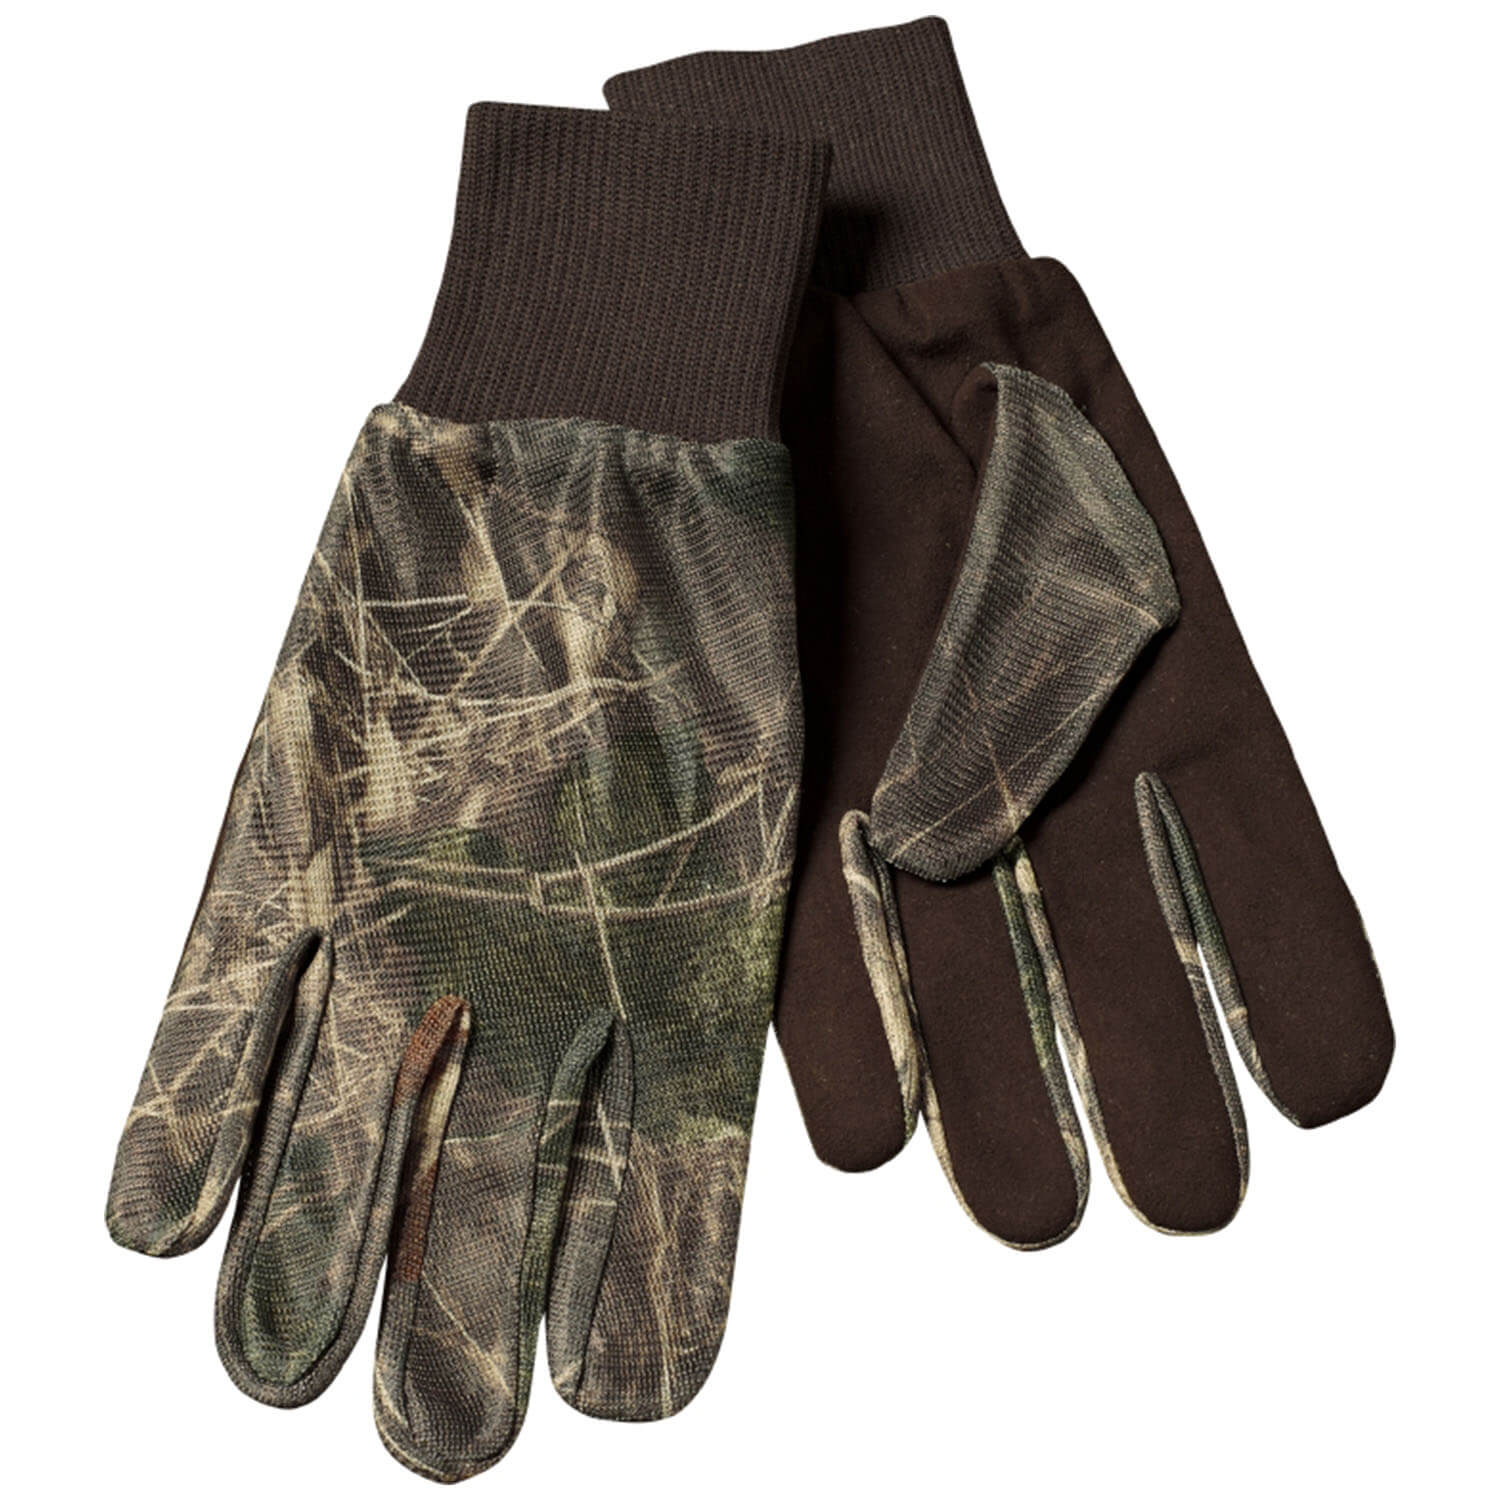 Seeland camo gloves leavy - Camouflage Gloves